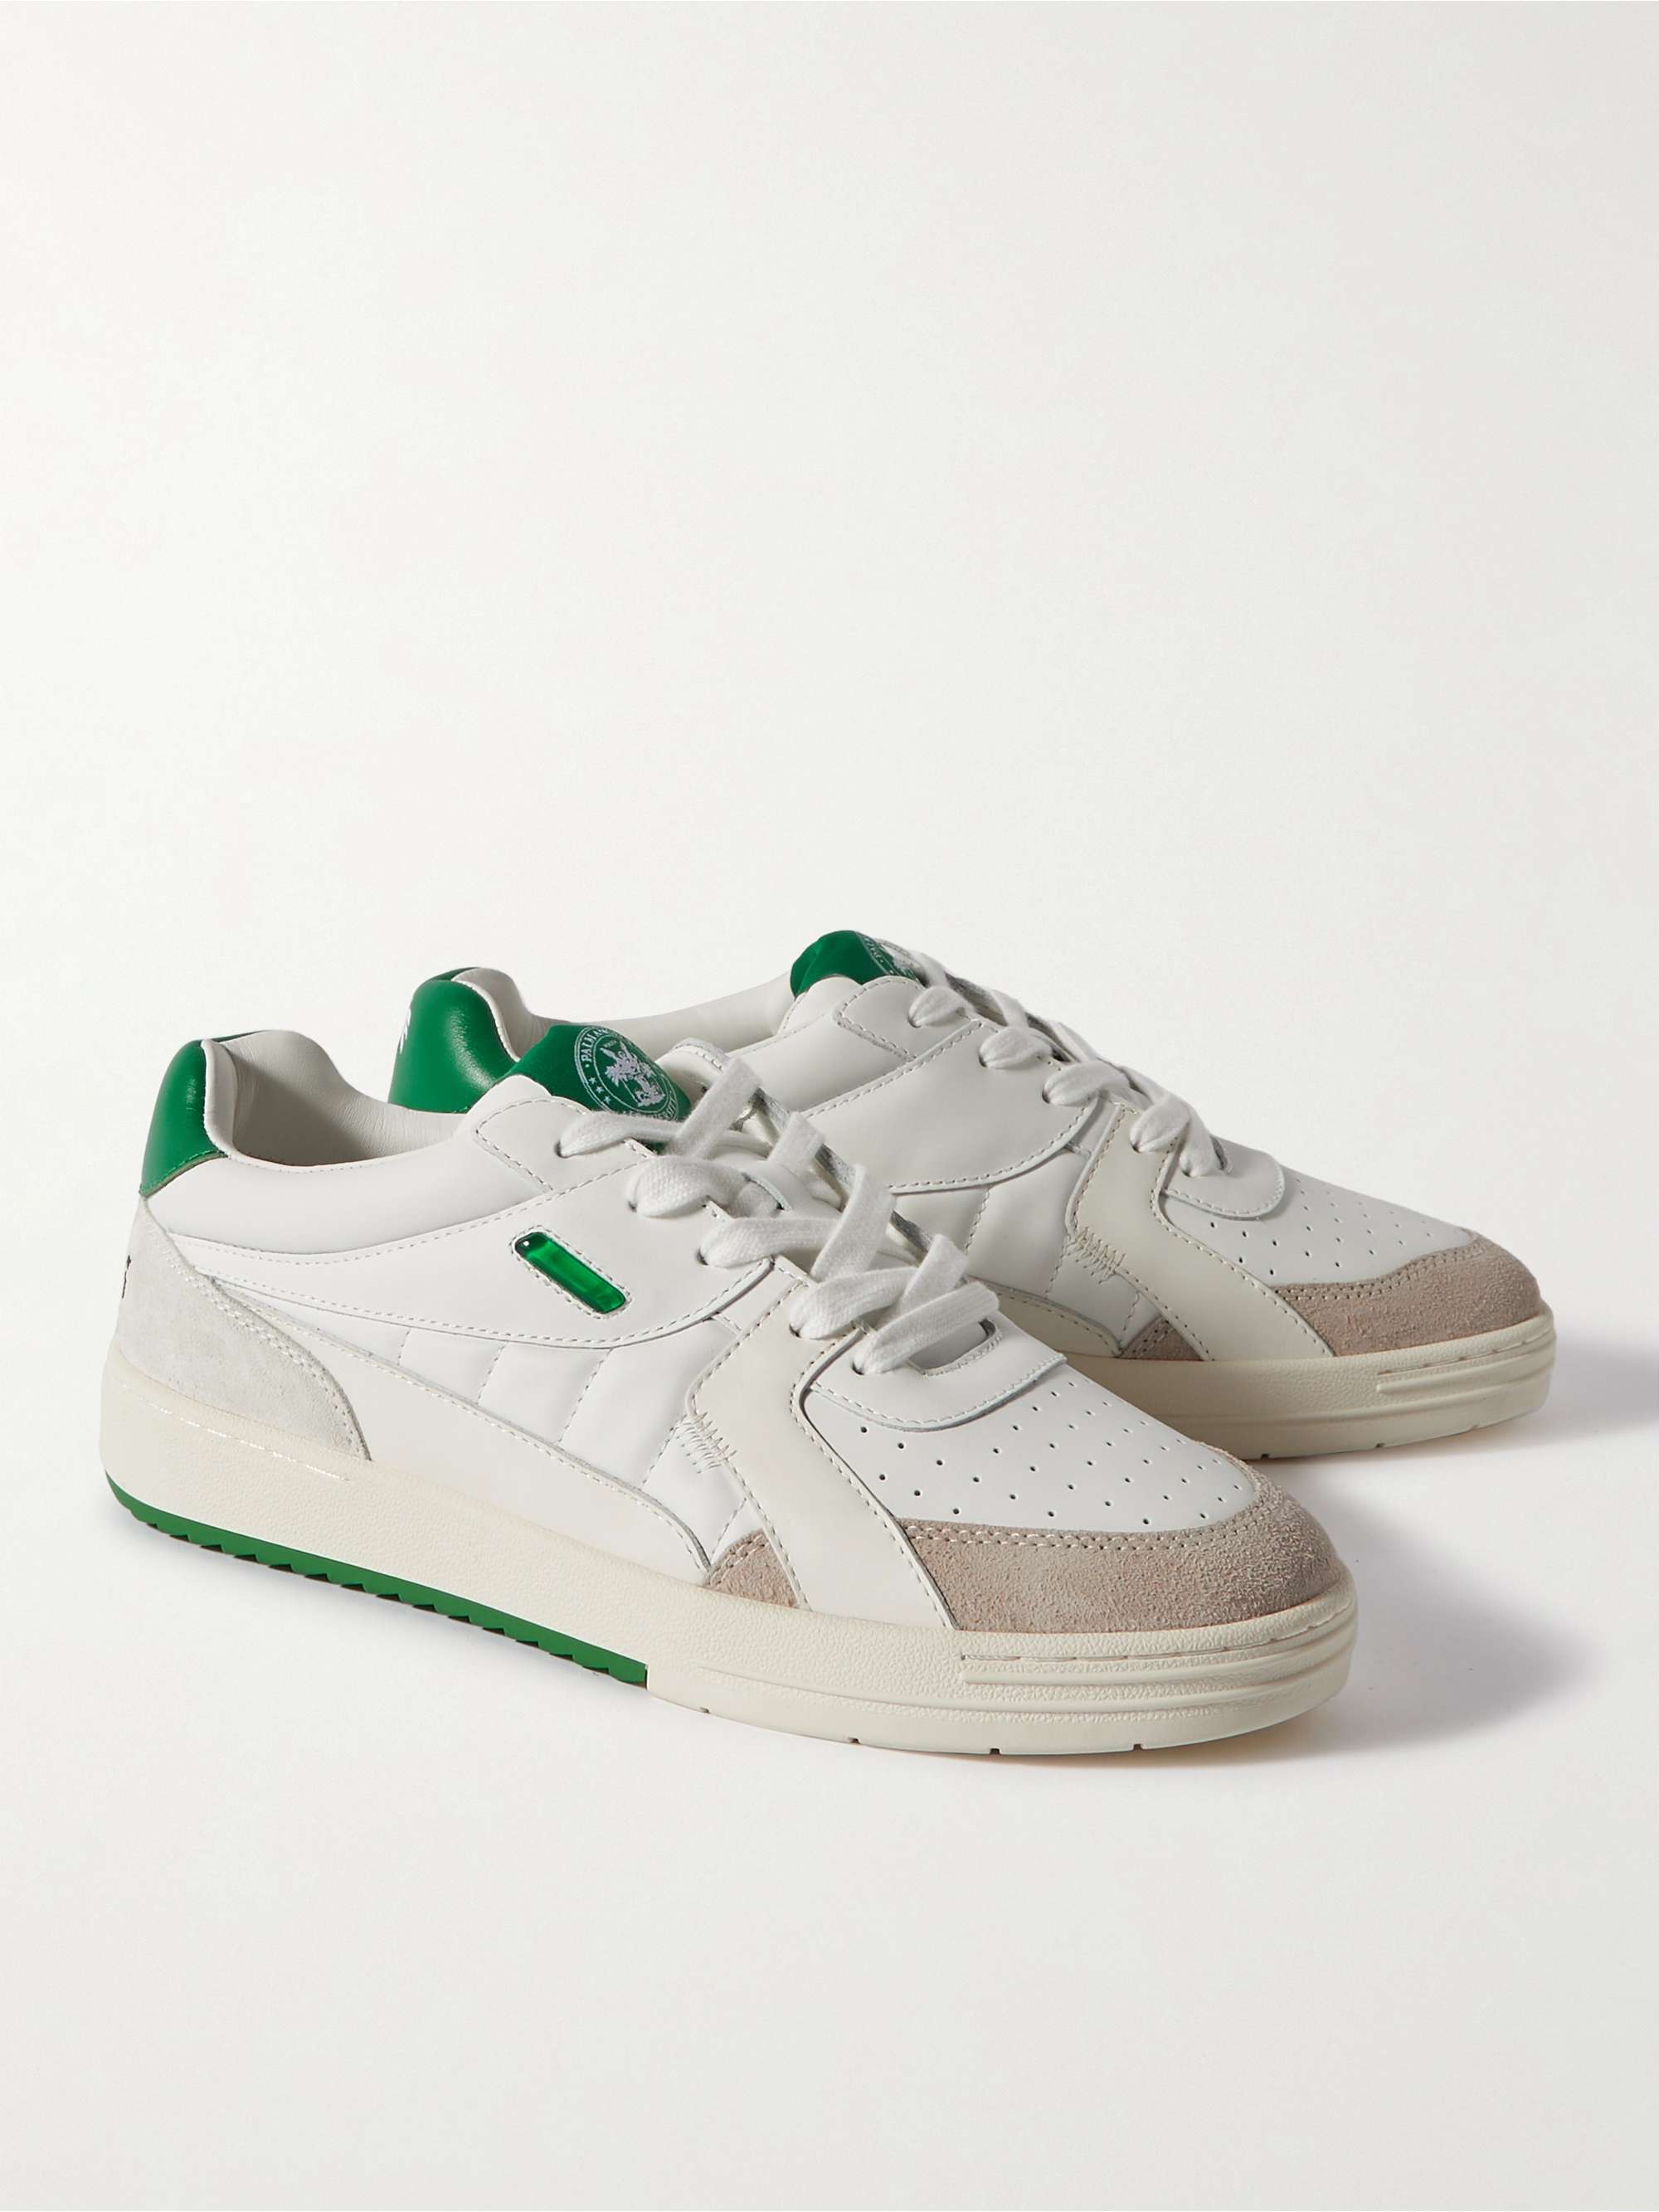 PALM ANGELS Palm University Suede-Trimmed Leather Sneakers